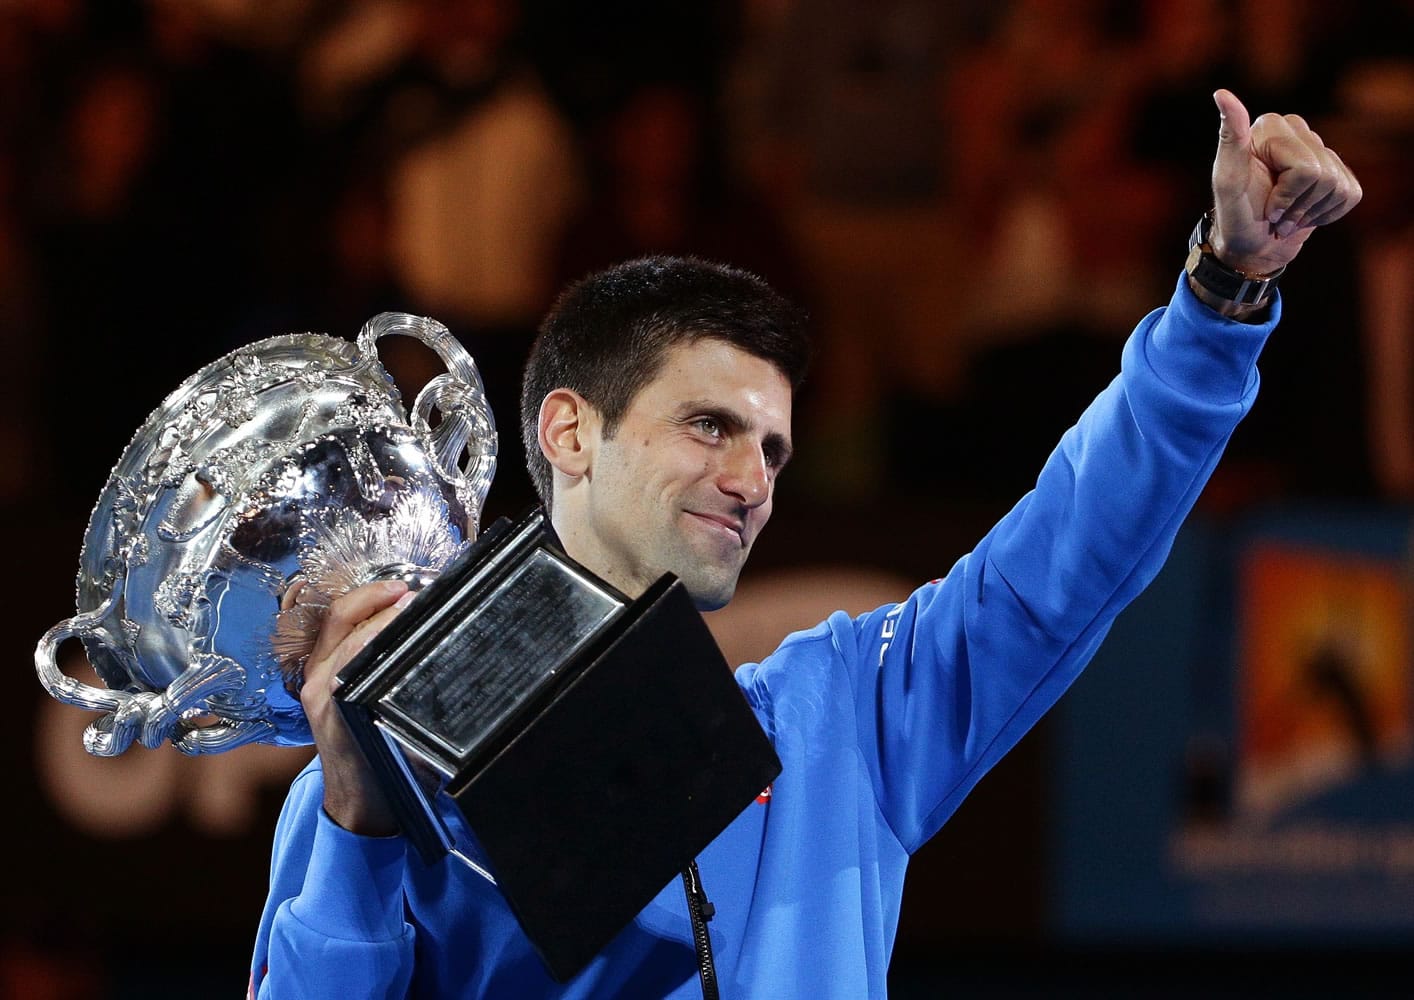 Novak Djokovic holds the champions trophy after defeating Andy Murray in the men's singles final at the Australian Open tennis championship in Melbourne, Australia, Sunday, Feb. 1, 2015.